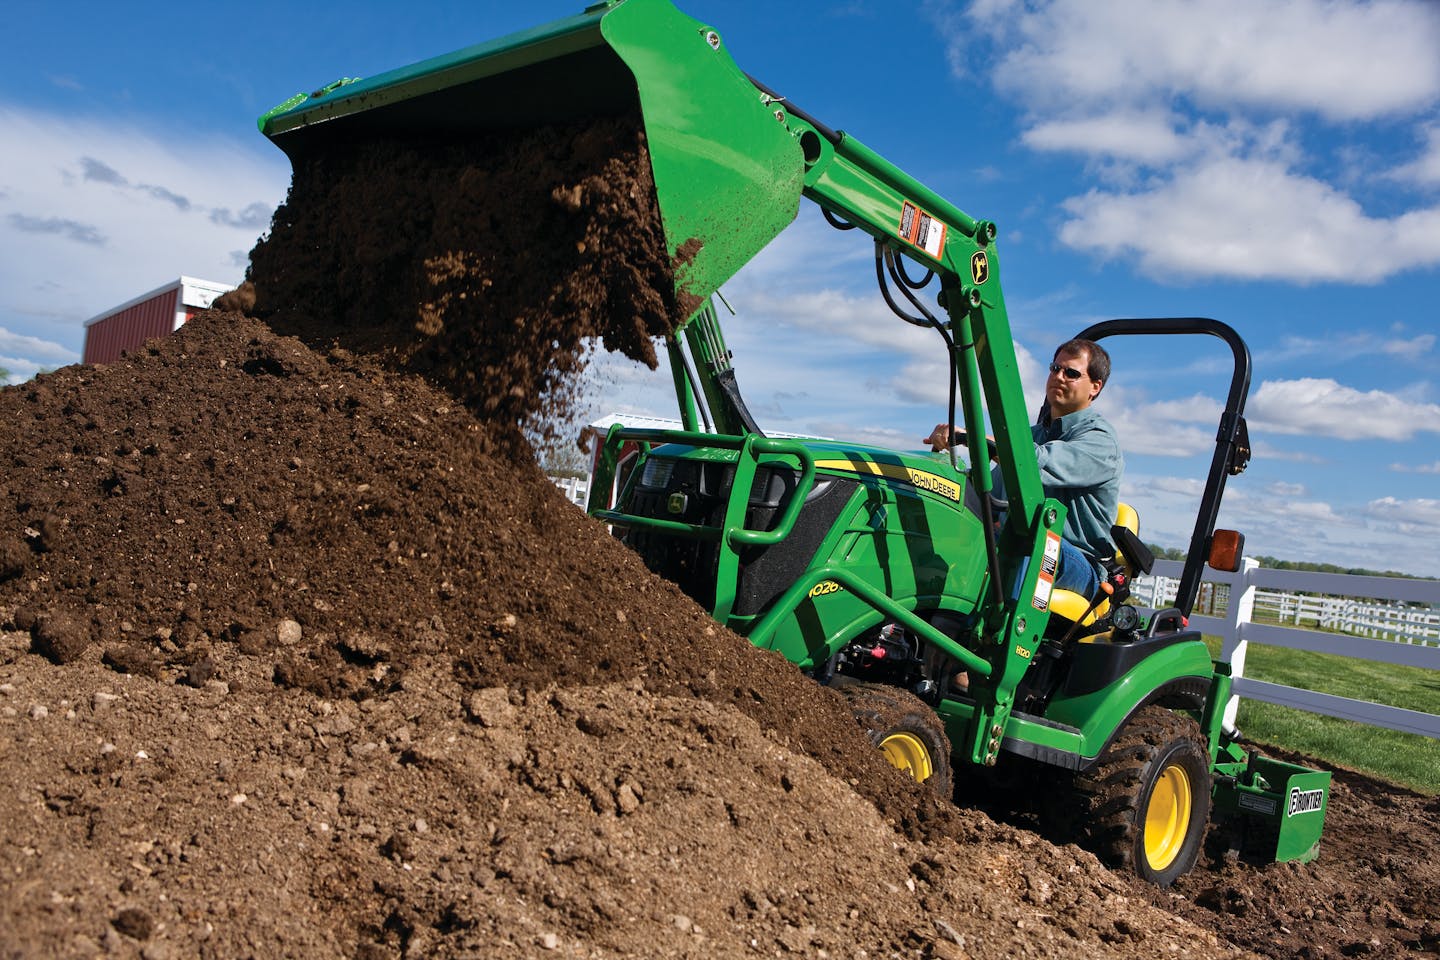 Implements add versatility to tractors